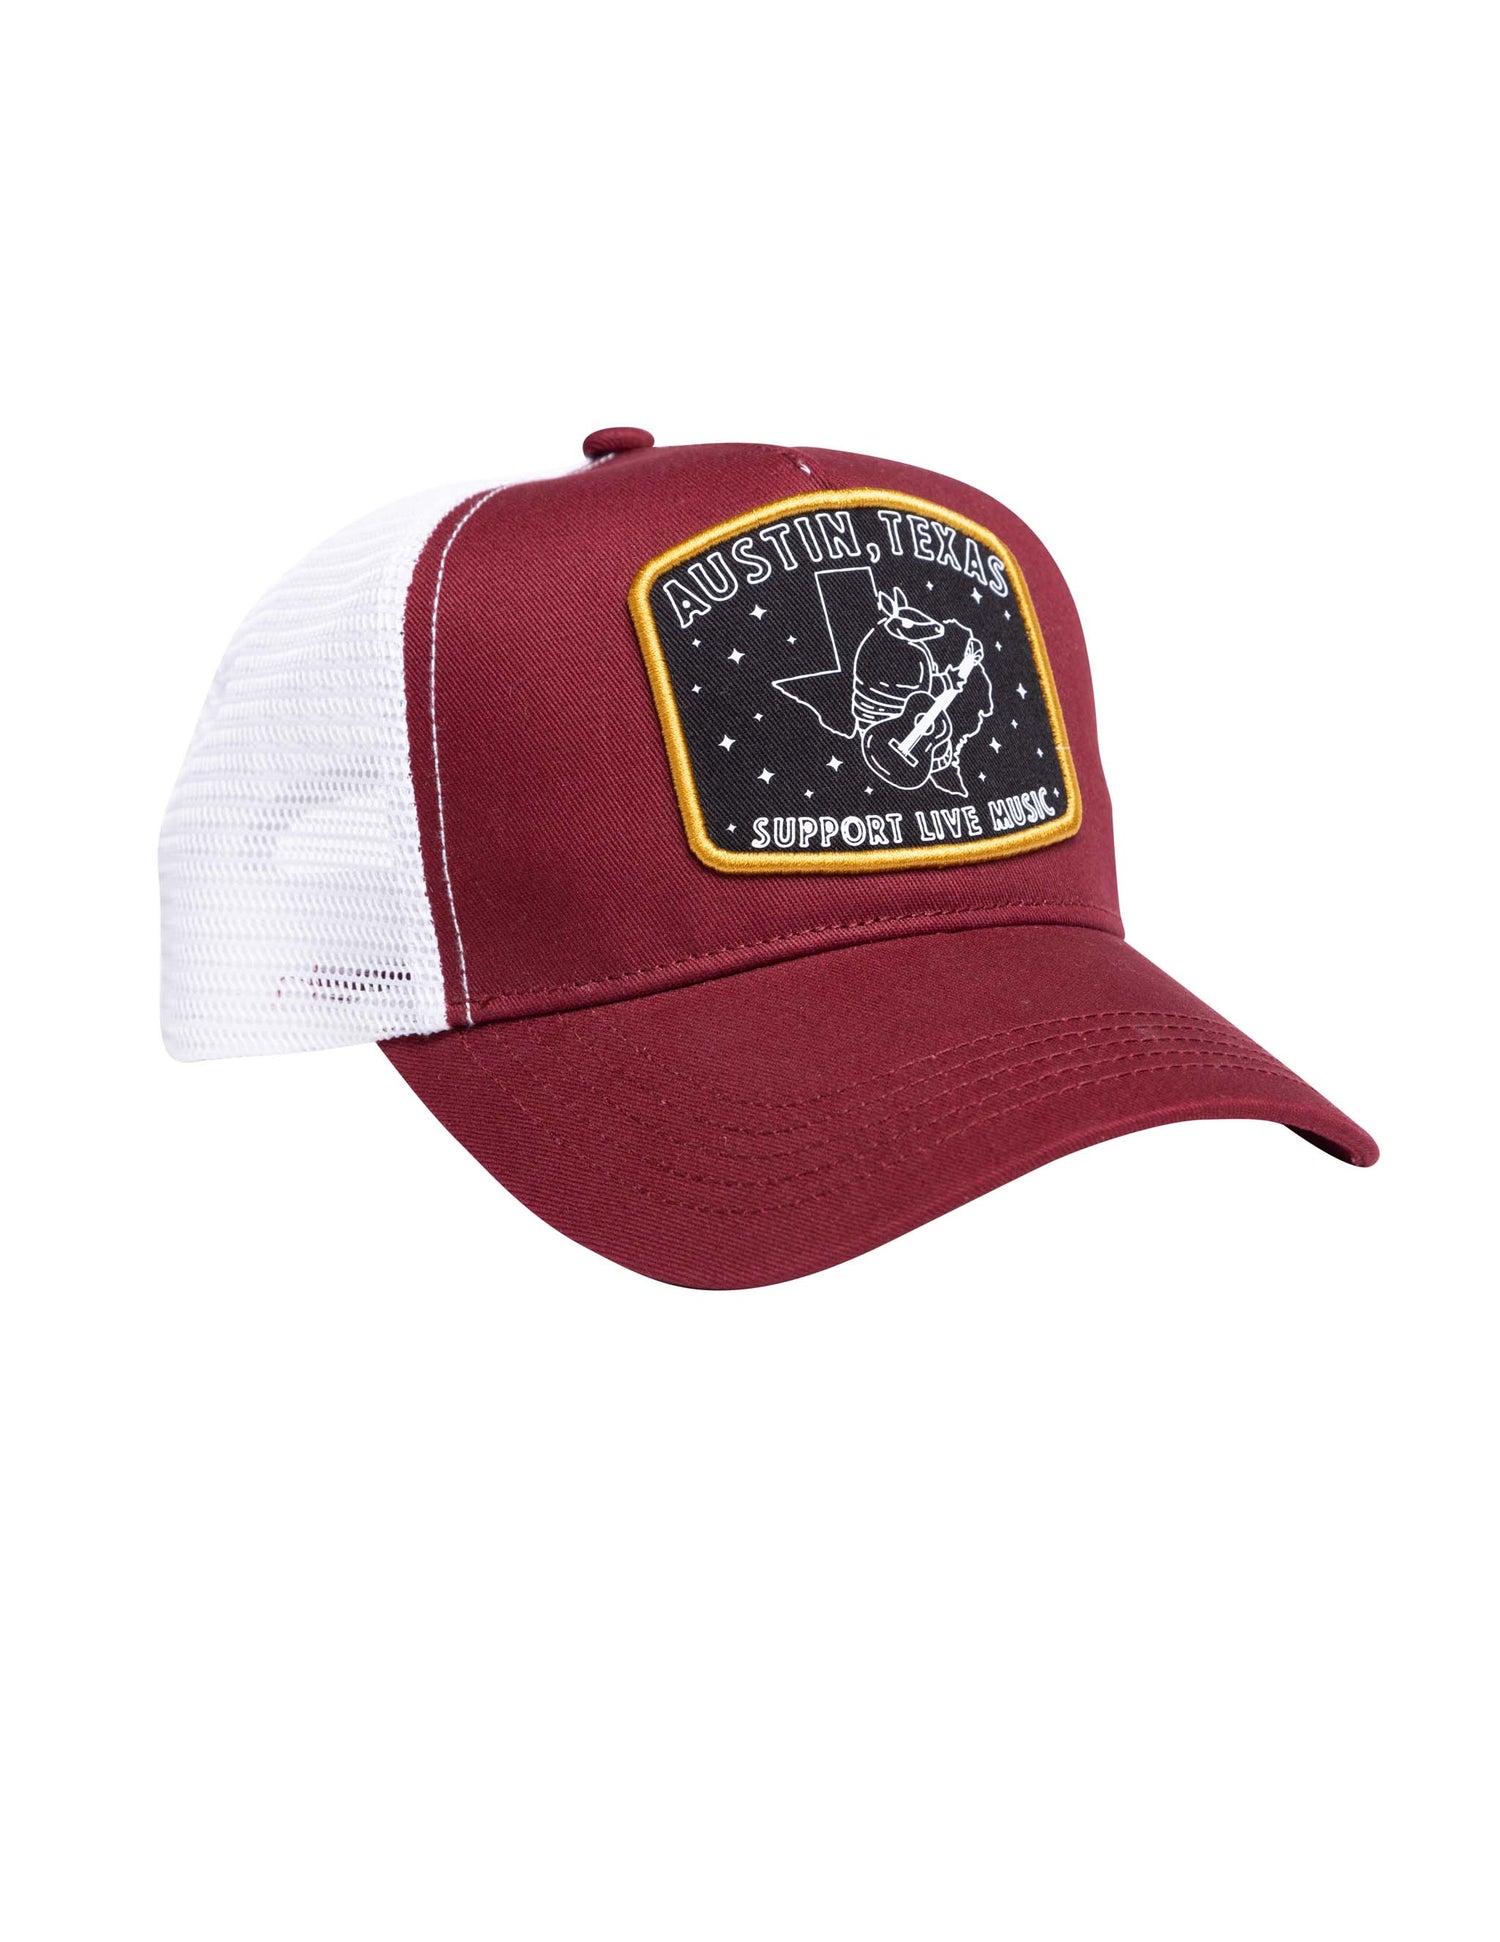 Austin Texas Armadillo Playing Guitar Patch Hat